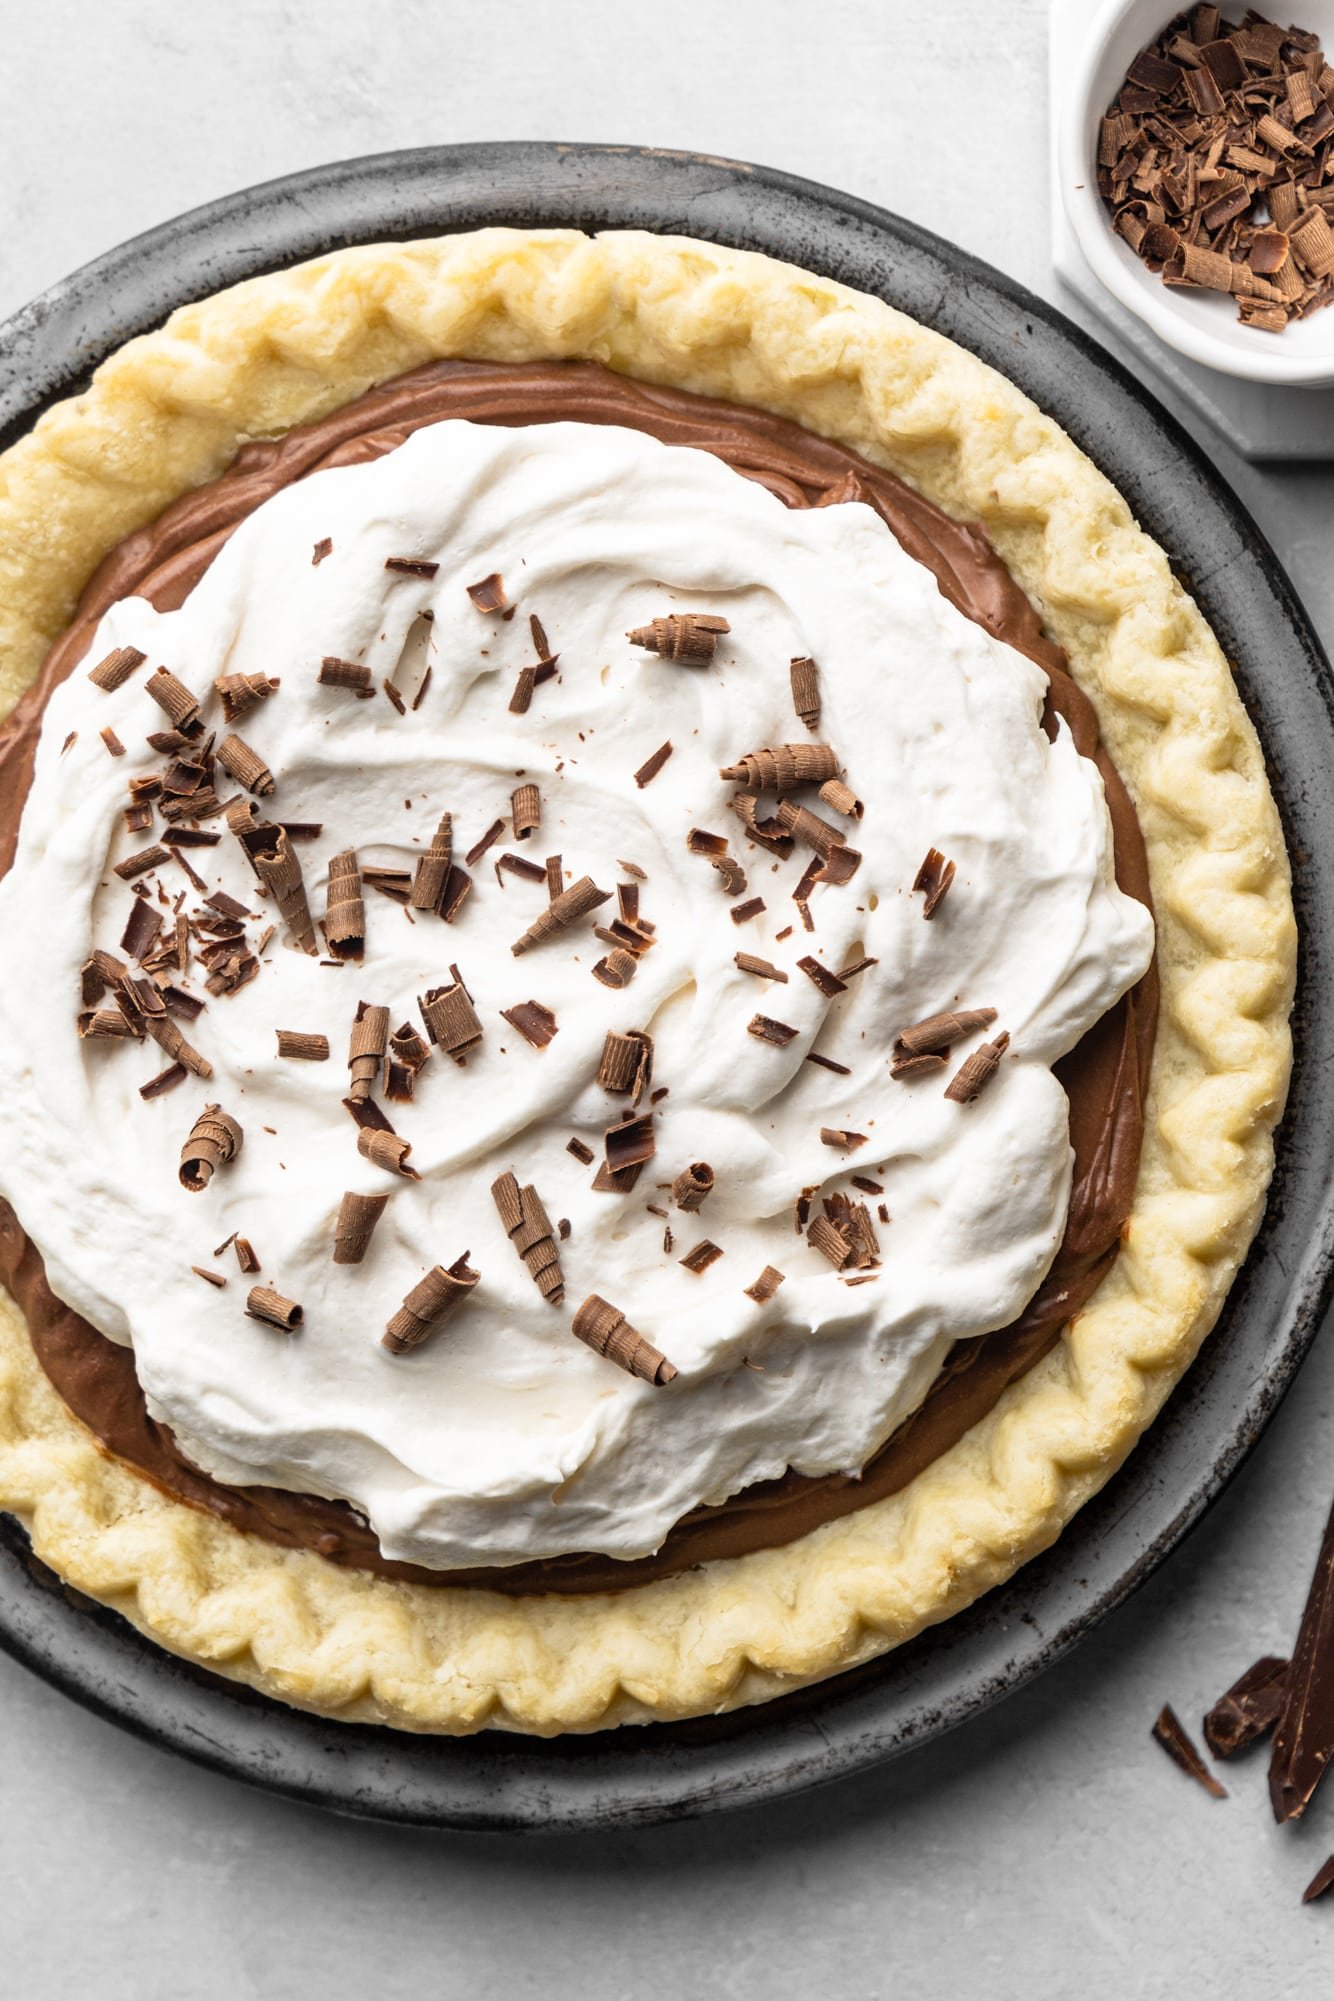 vegan chocolate pie topped with whipped cream and chocolate shavings.